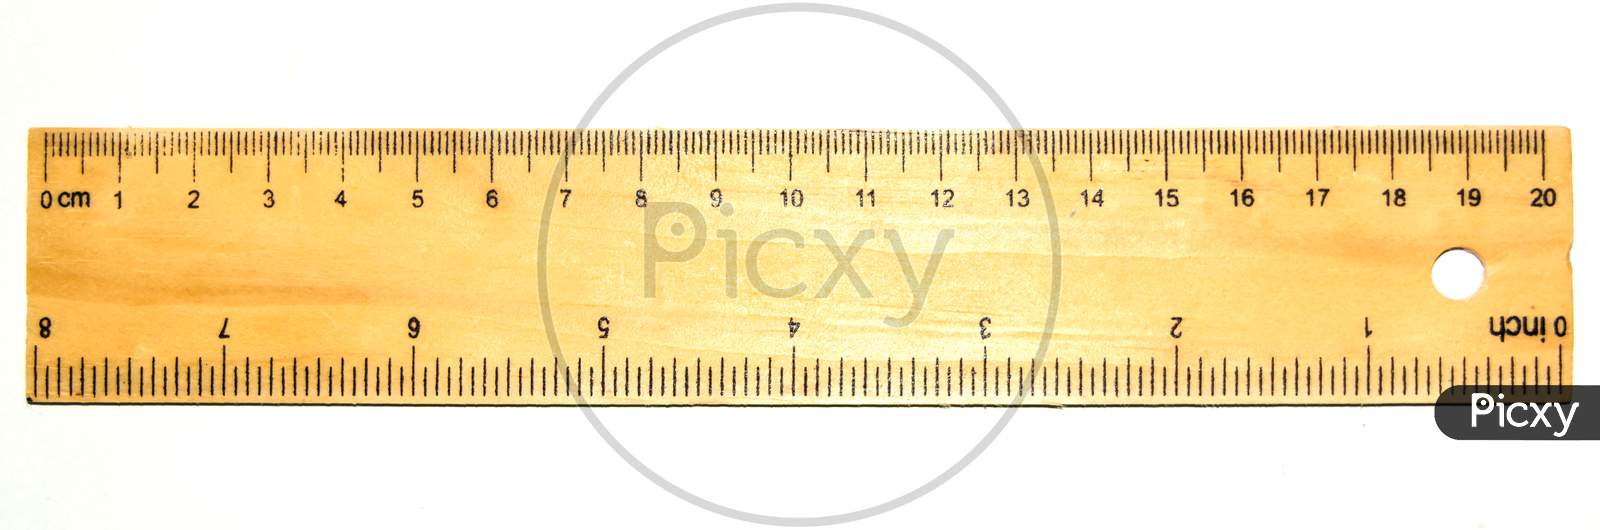 Hexagon Shaped Pencil color and Ruler on isolate white background.